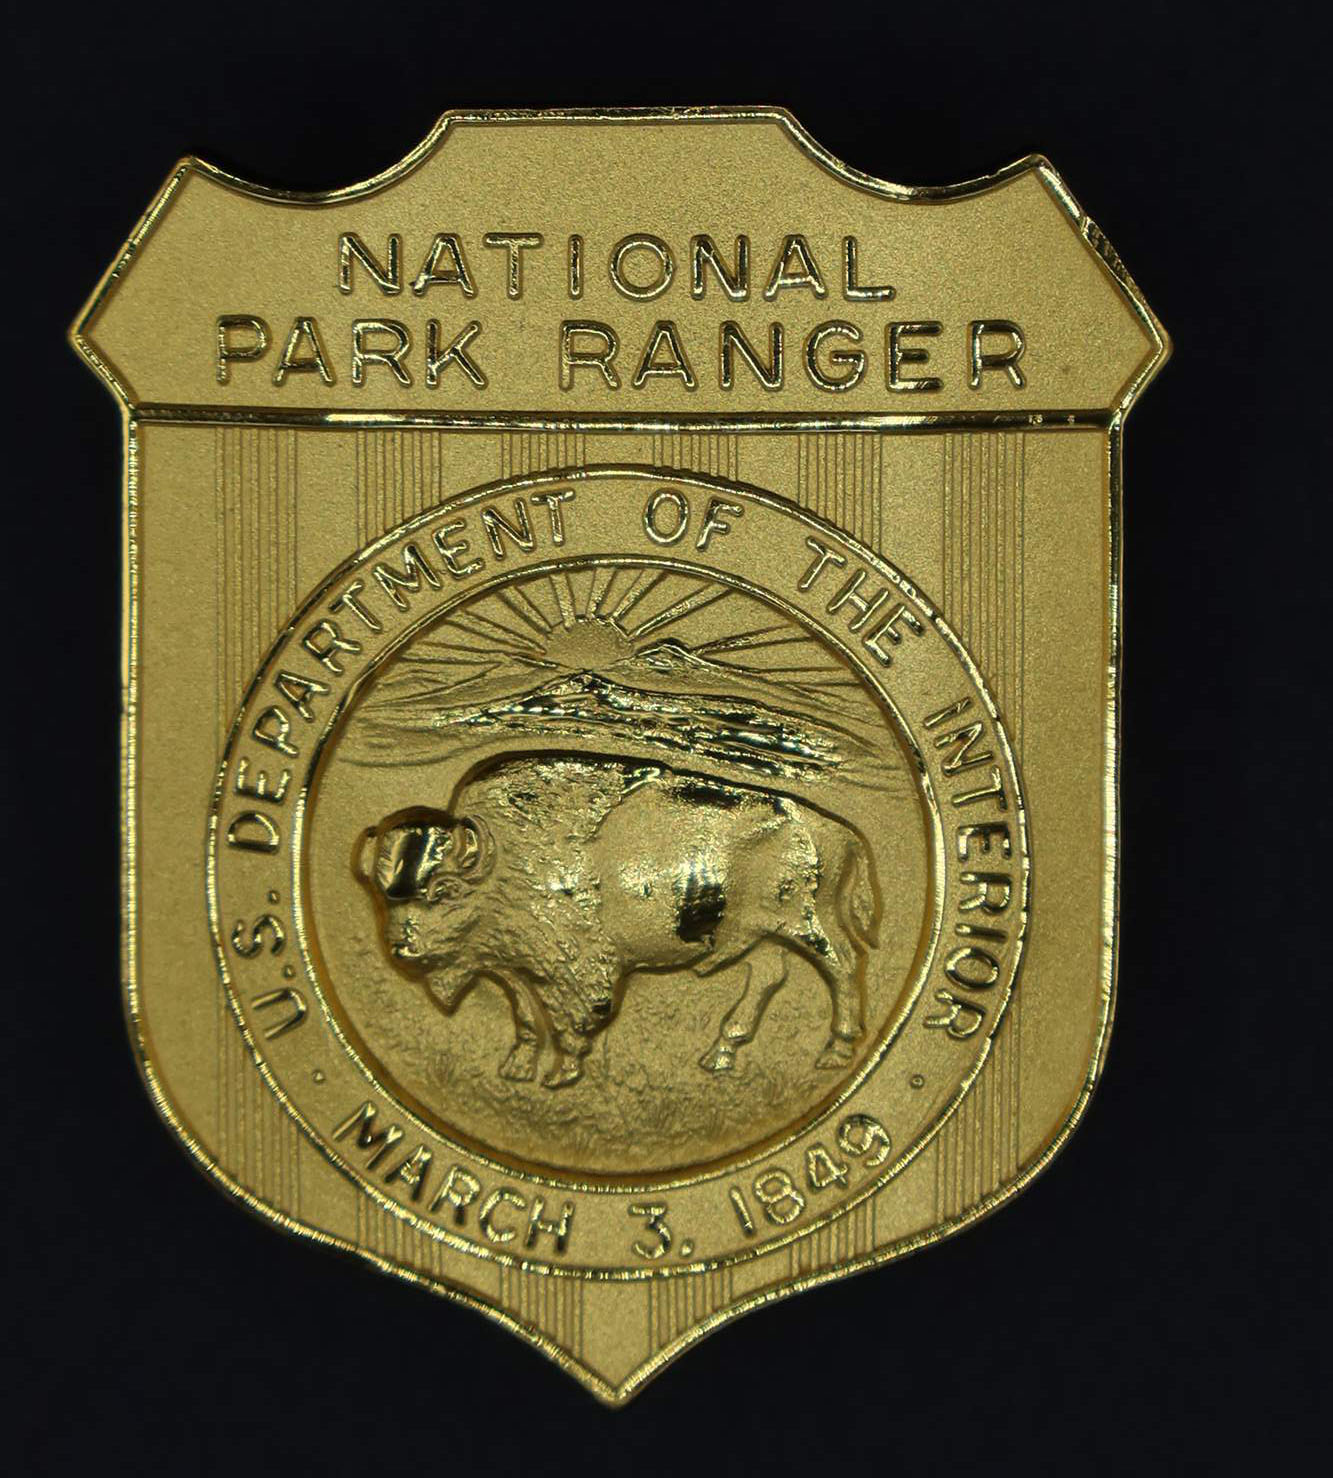 Gold shield-shaped badge marked National Park Ranger. Round seal in the middle has a bison with US Department of the Interior March 3, 1849 around it.